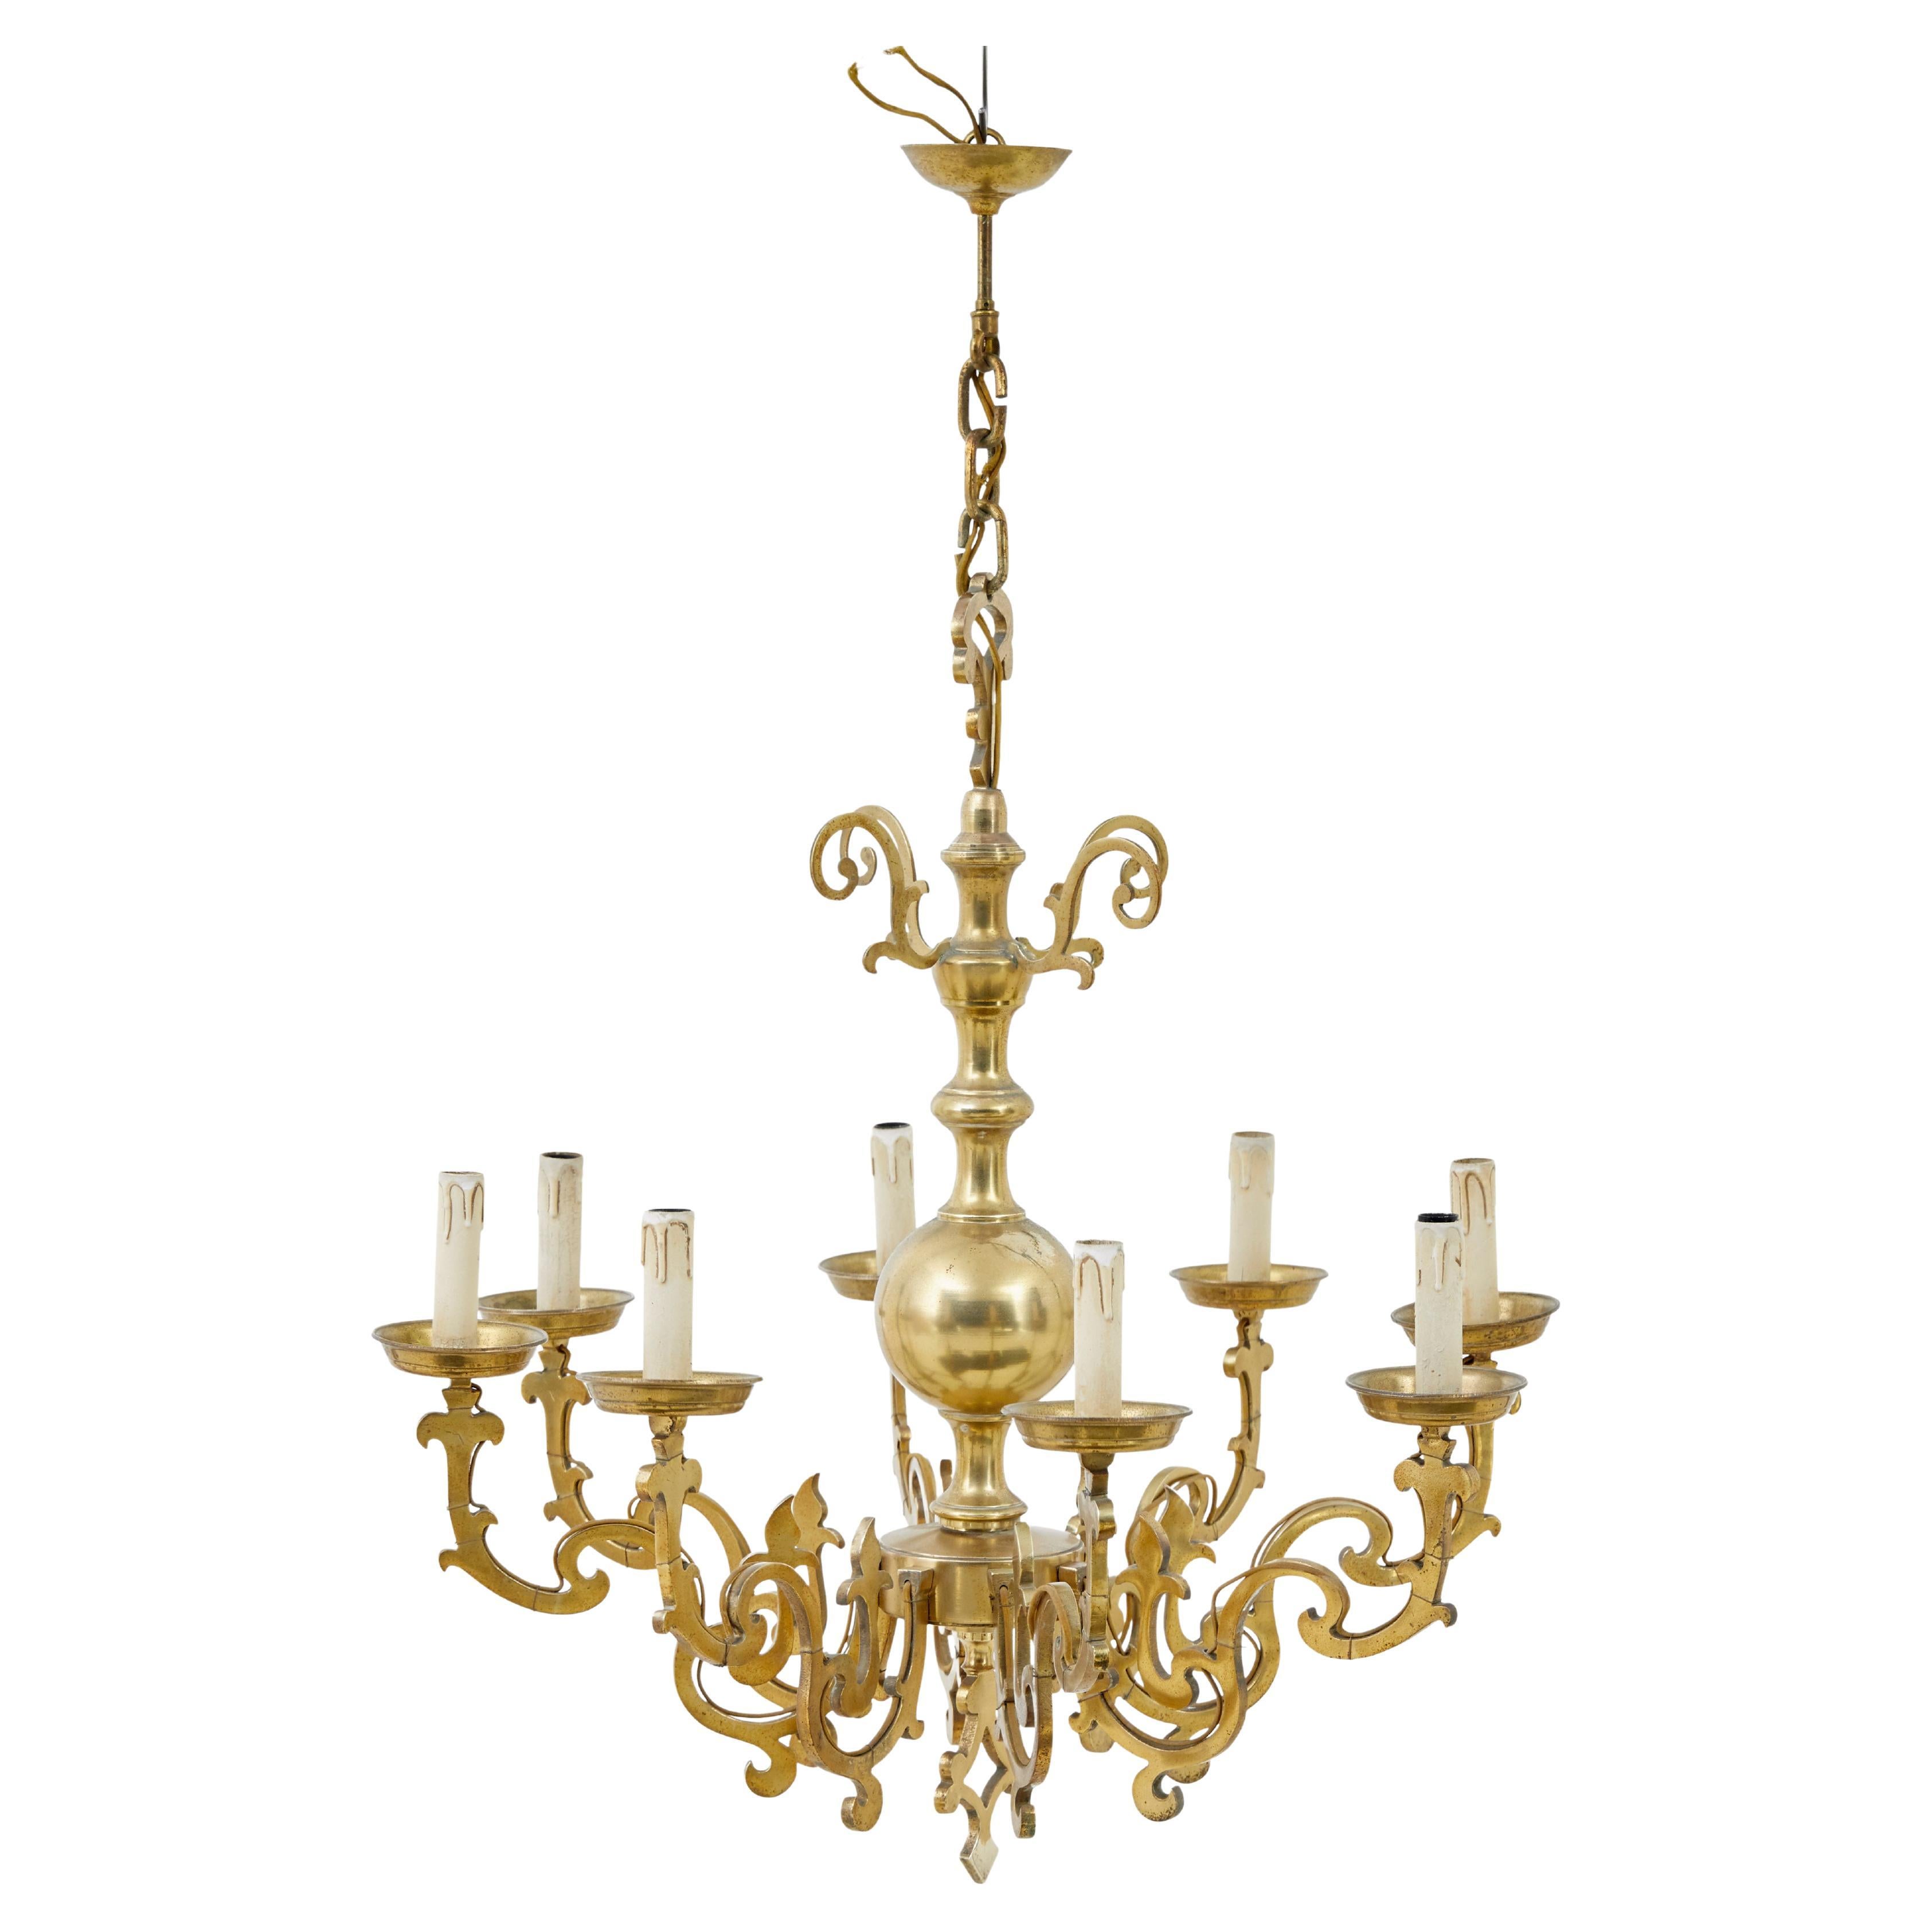 Large early 20th century 8 arm brass chandelier